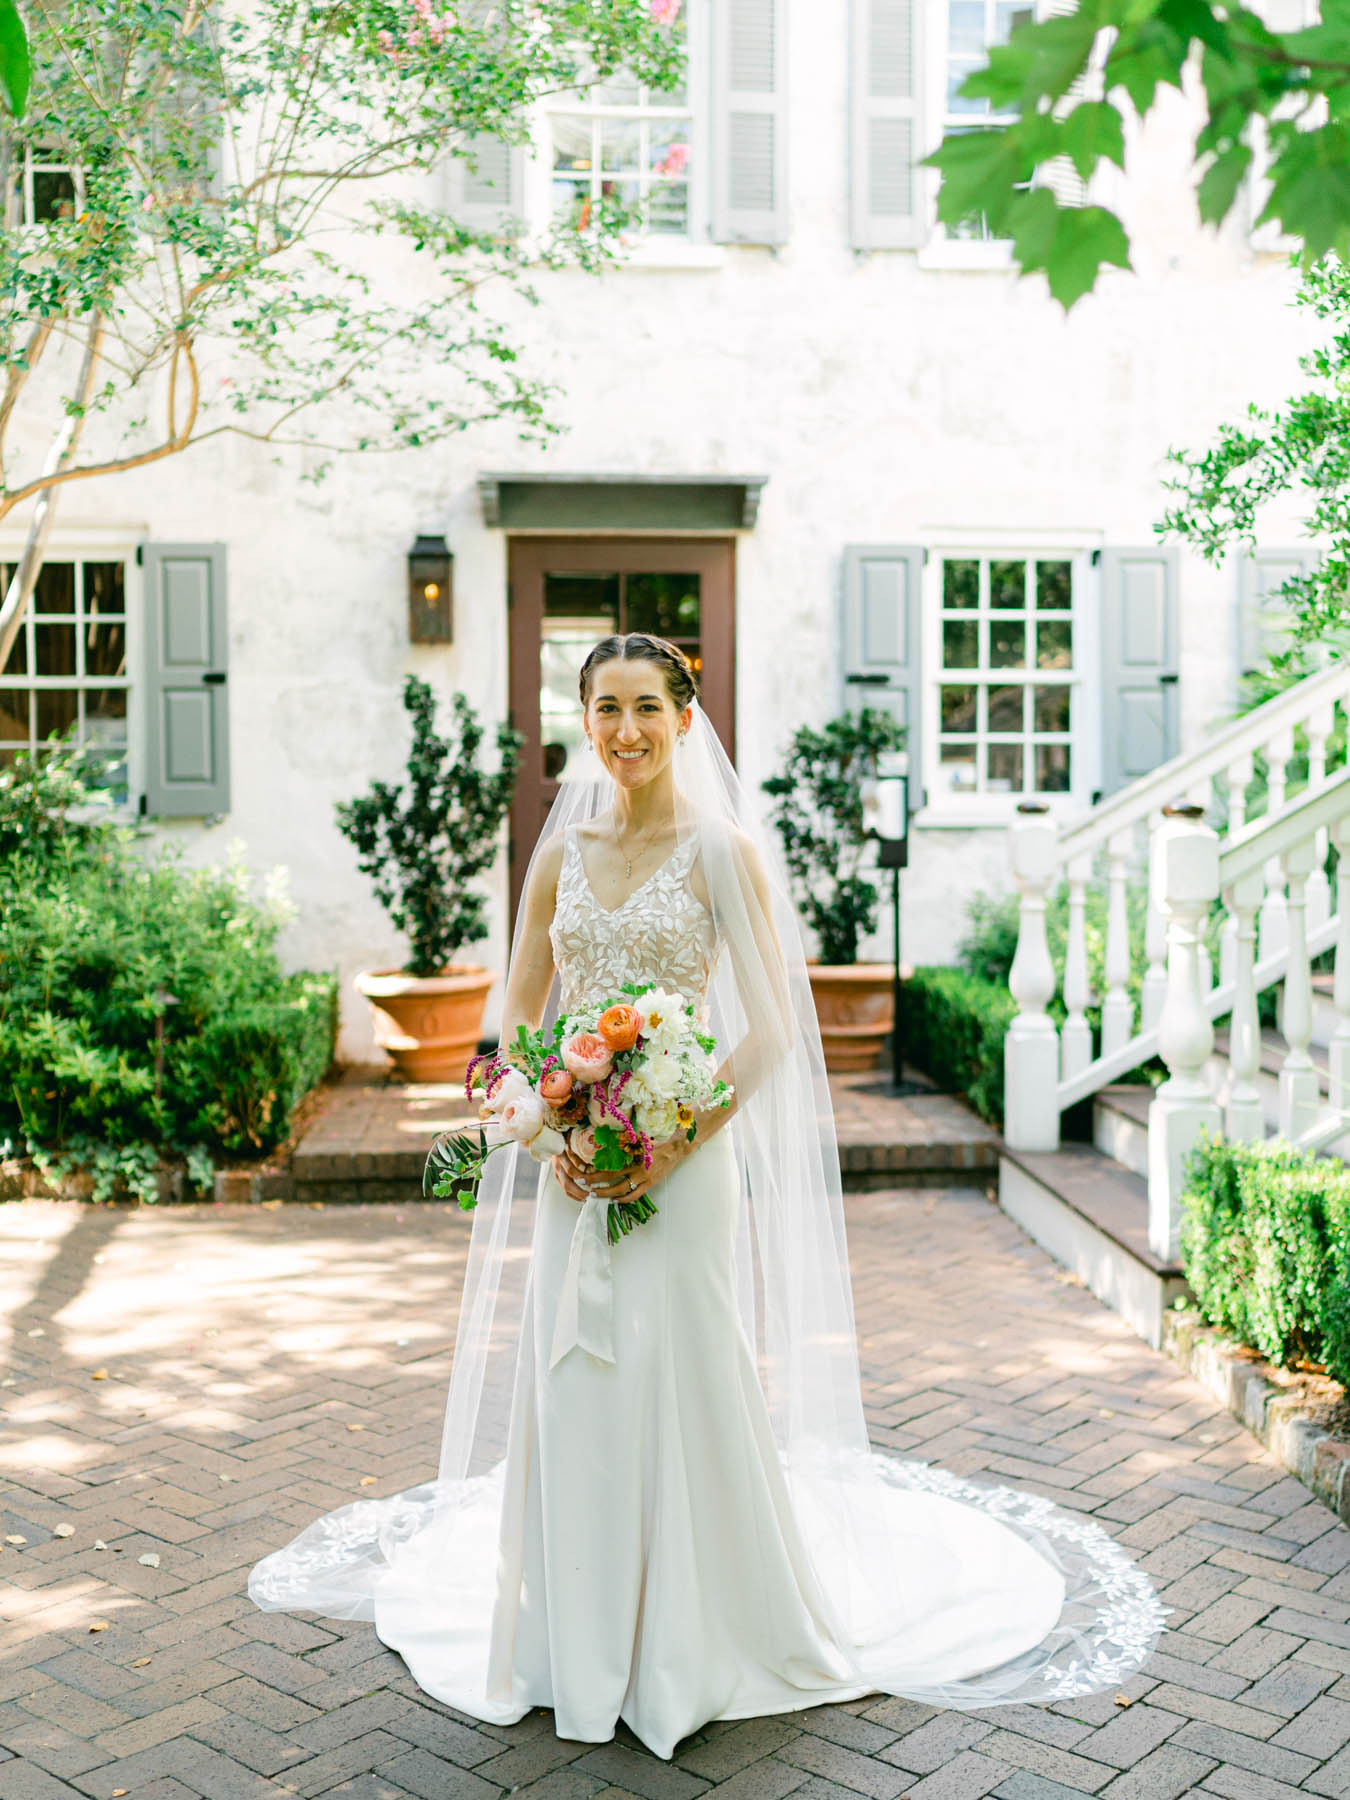 Bridal wearing a veil and holding a bouquet in a courtyard